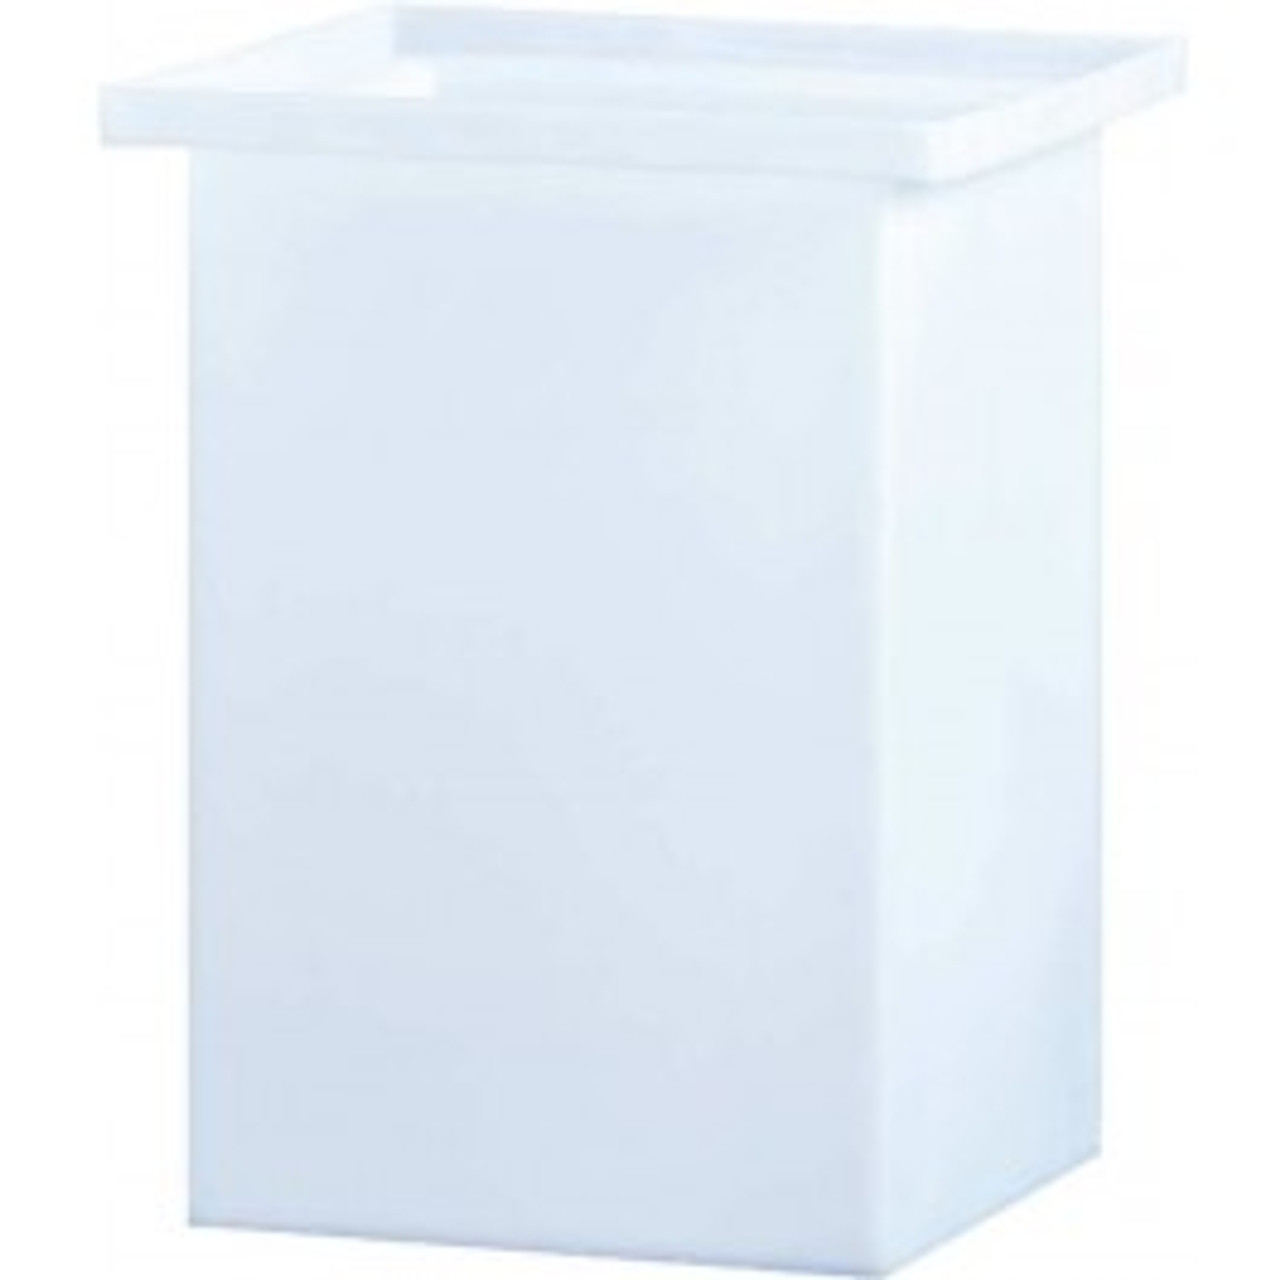 An image of a 5 Gallon PP Ronco White Cylindrical Open Top Tank | 5PP